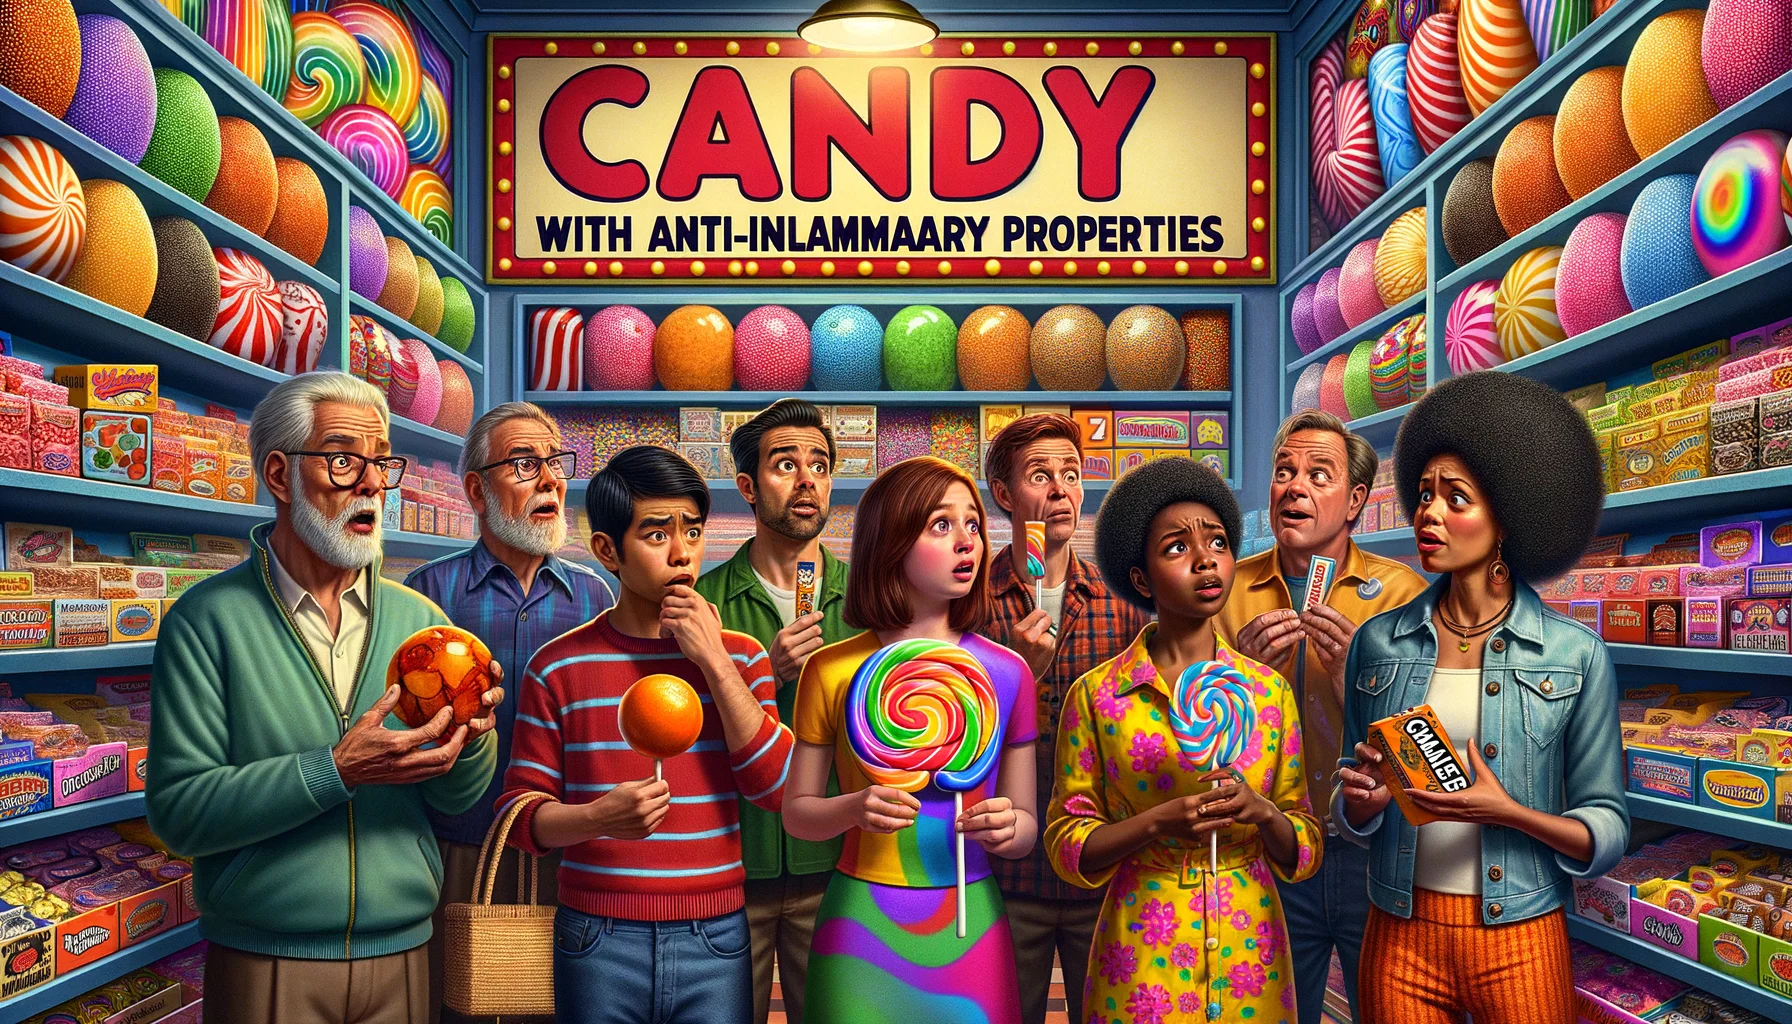 Imagine a humorous real-life situation: a crowded candy store with a large, colorful sign boasting 'Candy with Anti-Inflammatory Properties.' Its shelves are adorned with eccentric, radiant sweet treats of various shapes and sizes. A mixed-age group of intrigued customers - a middle-aged Caucasian man with a puzzled expression, a young Hispanic woman in vibrant attire curiously examining a lollipop, a Black teenager with a surprised look holding a pack of gumdrops, a South Asian lady with a bemused smile holding a box of chocolates. Each person reflecting the quirkiness of this concept.